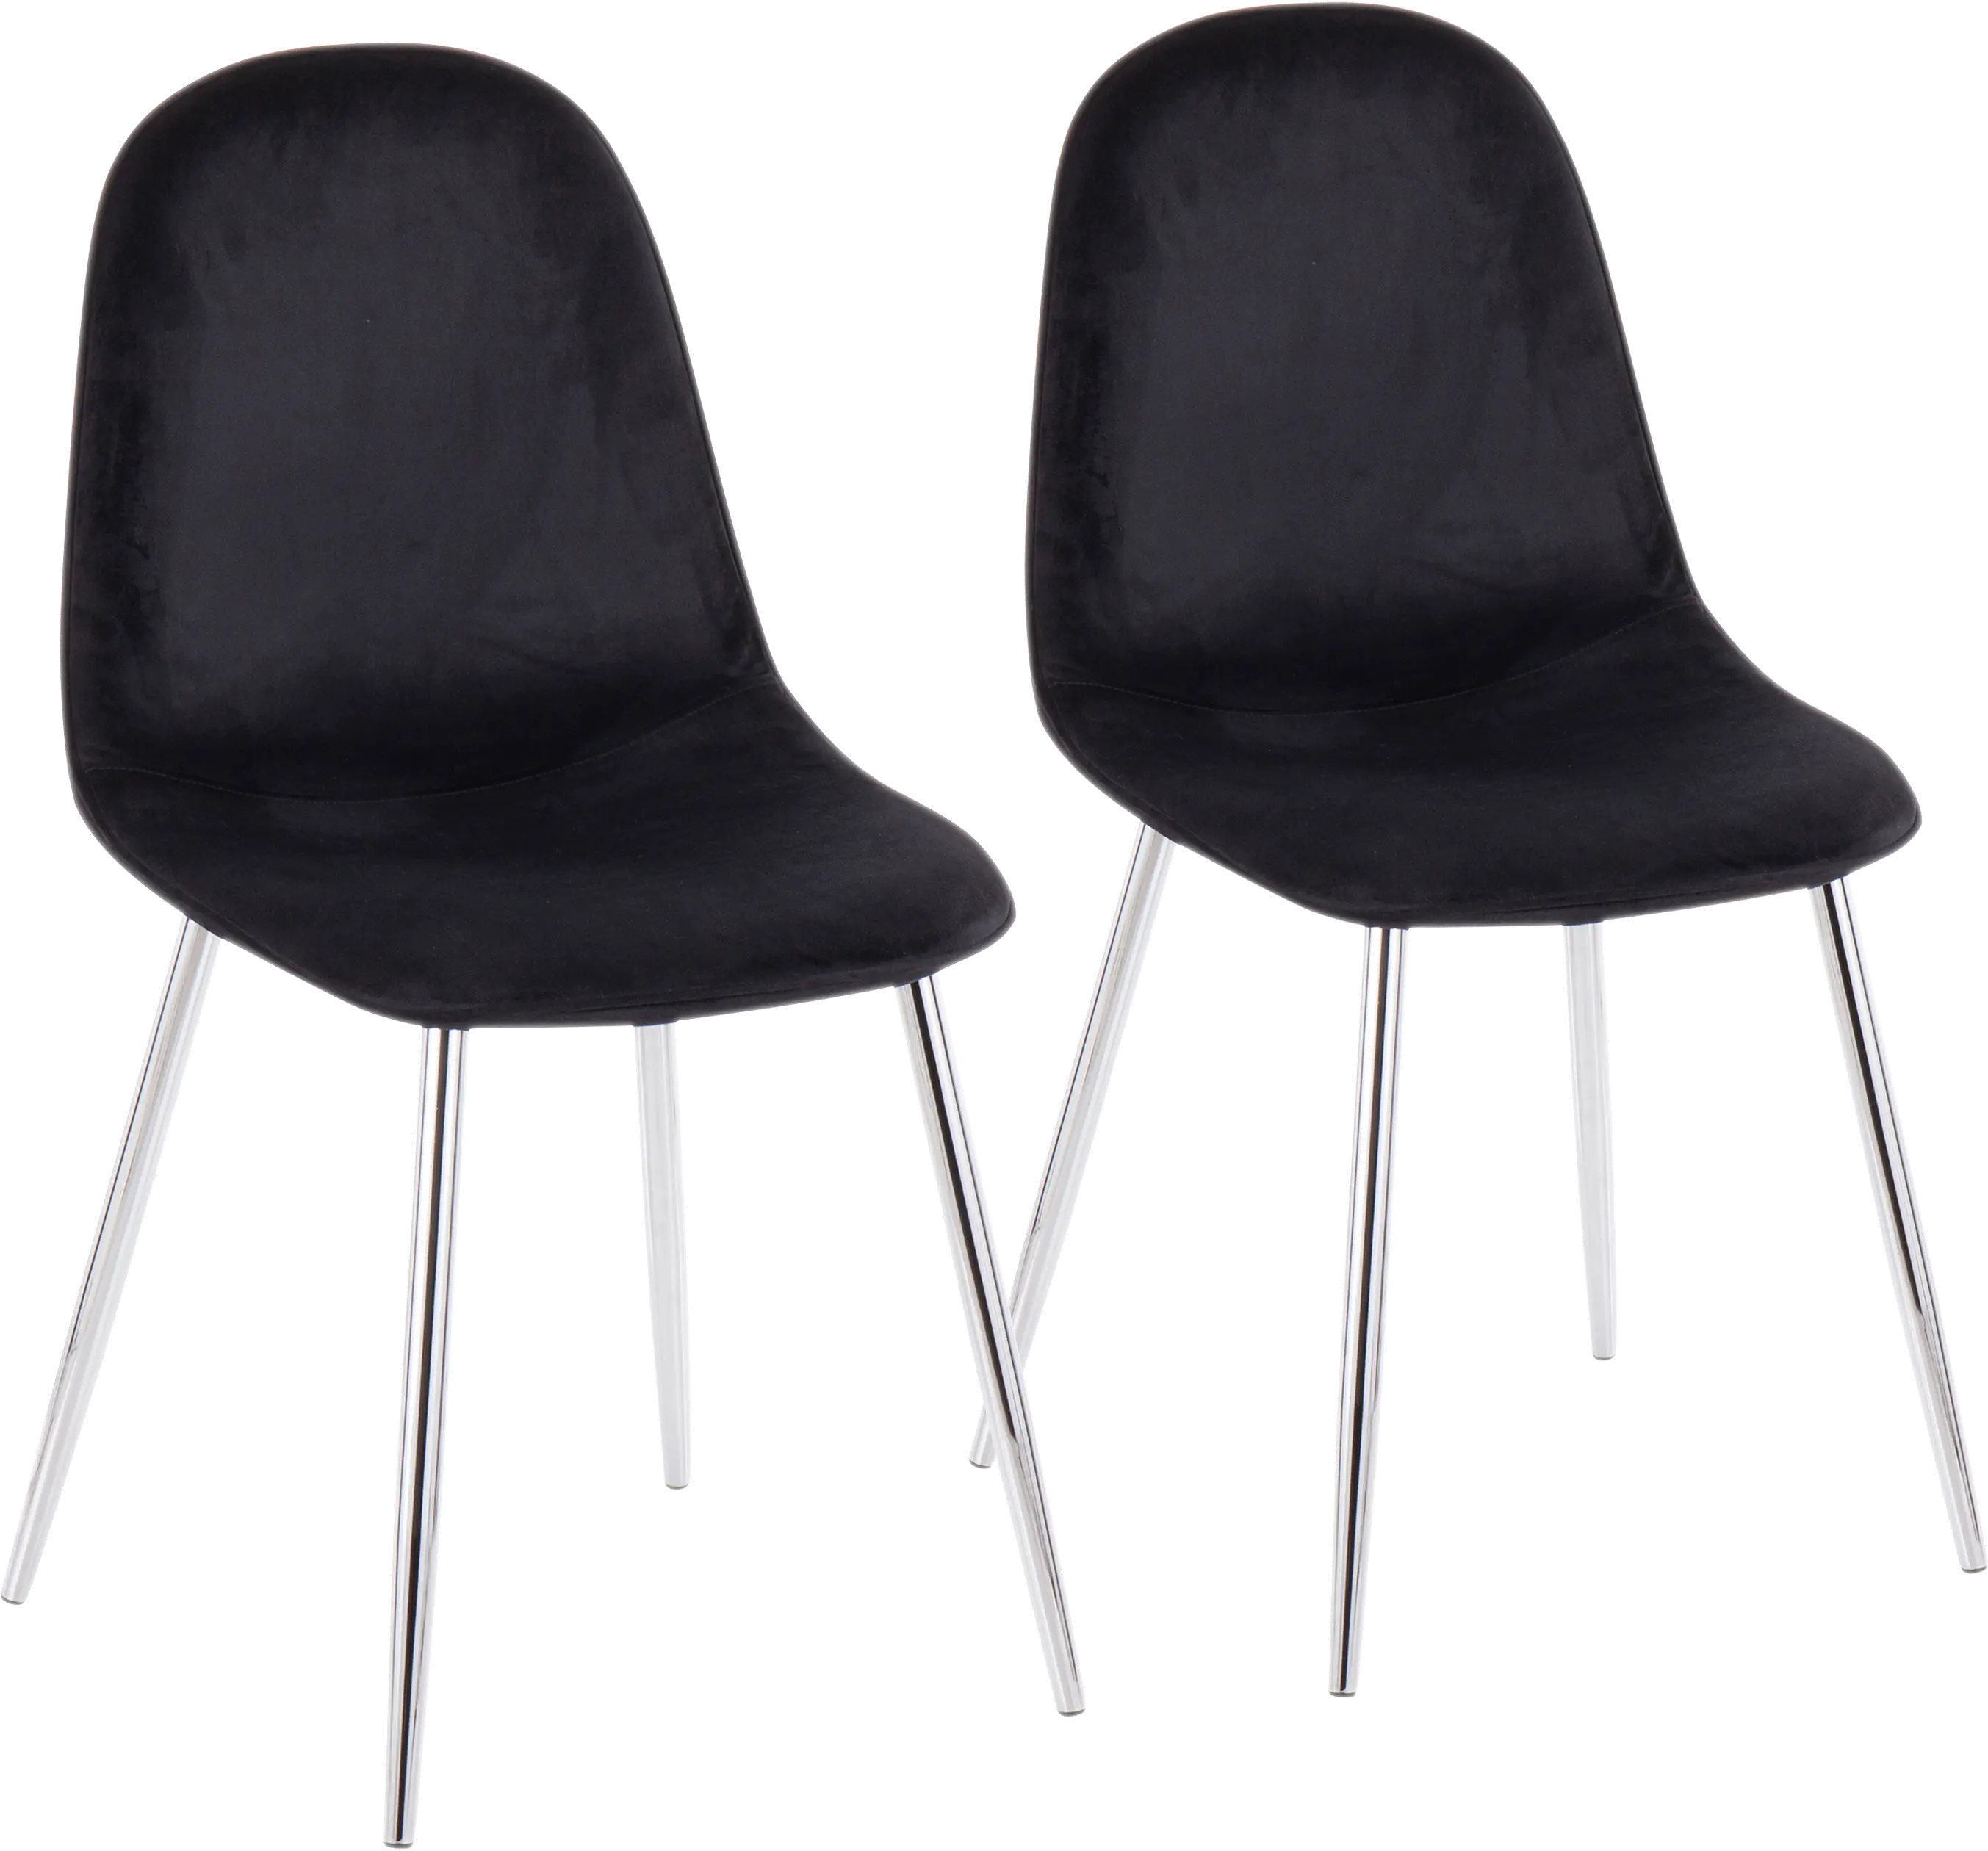 Contemporary Black and Chrome Dining Room Chair (Set of 2) - Pebble